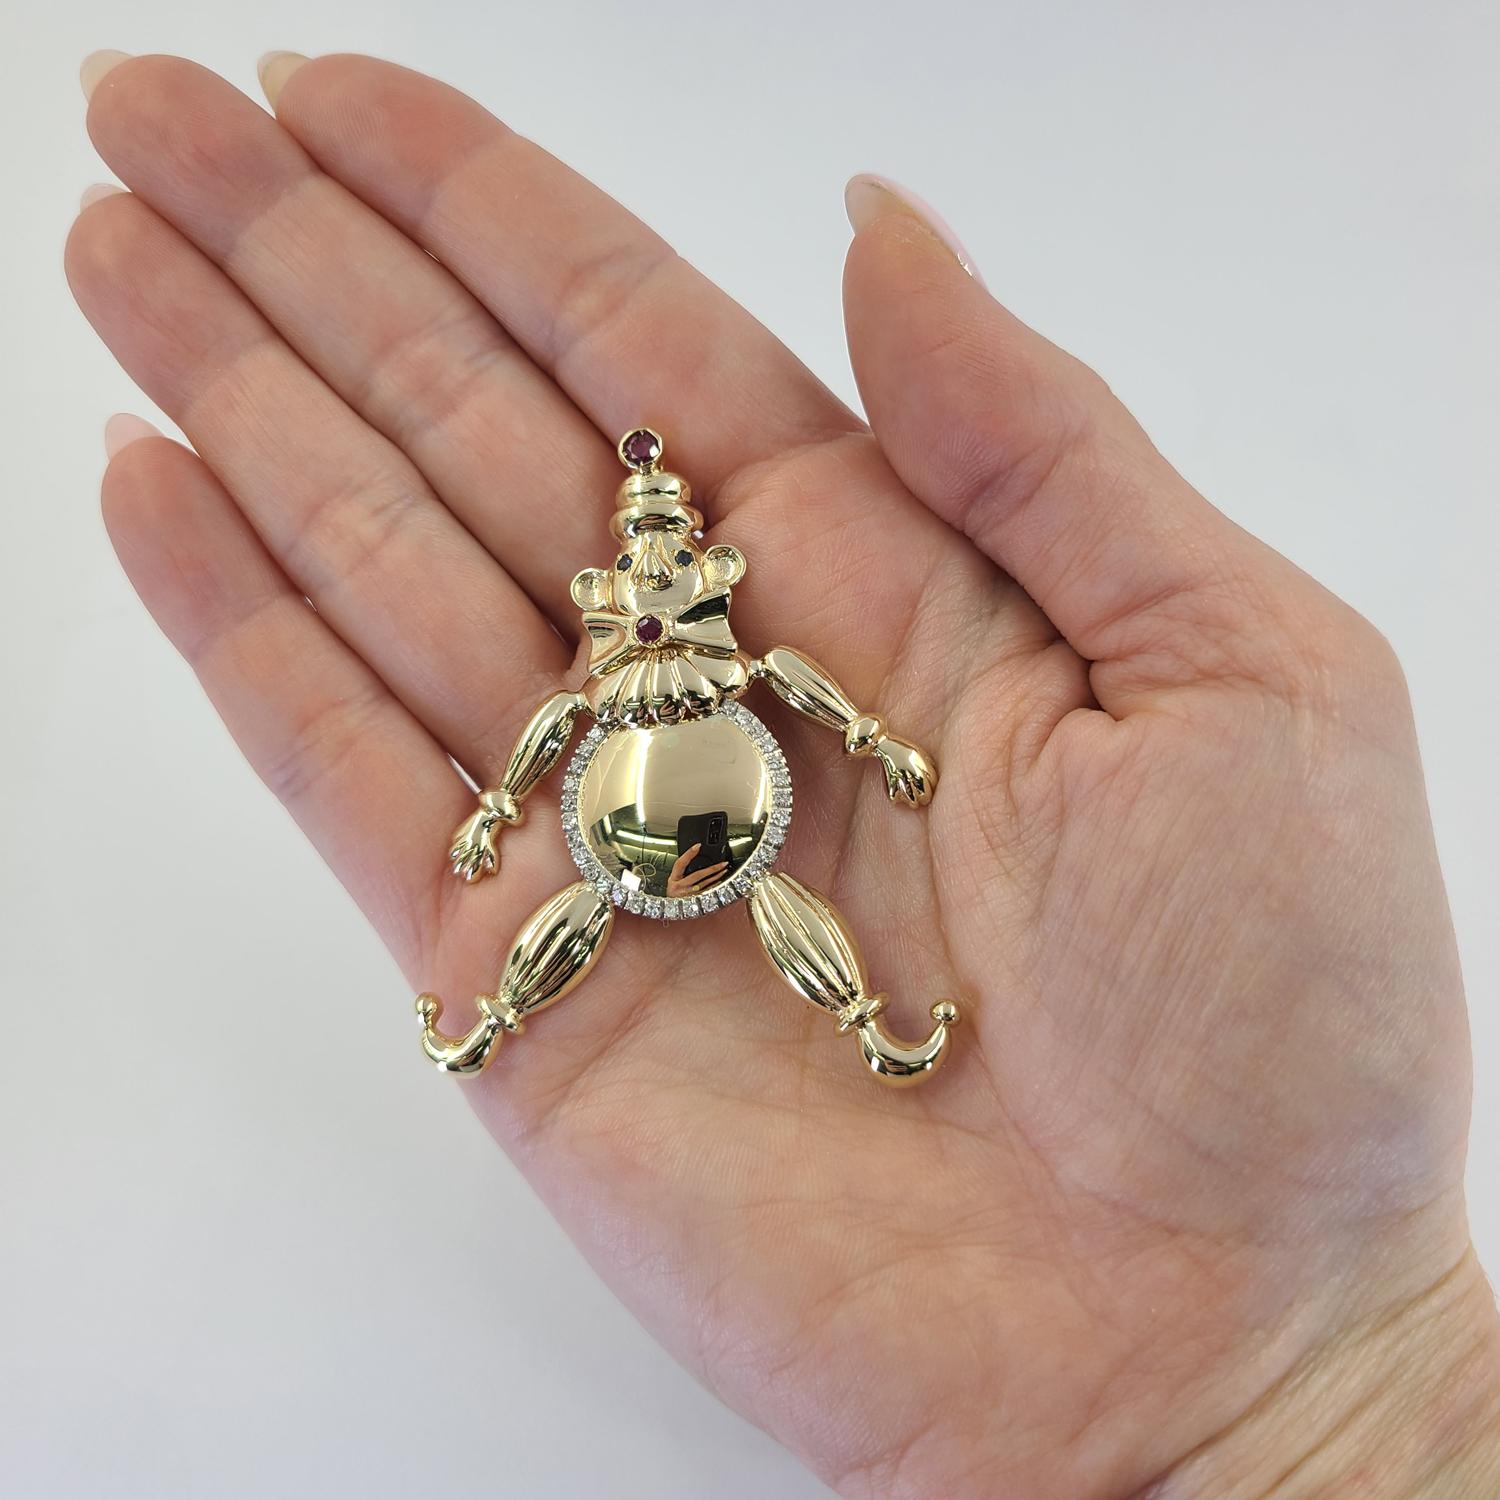 18 Karat Yellow Gold Engravable Clown Pendant Featuring 29 Single Cut Diamonds of SI Clarity and G/H Color Totaling 0.22 Carats, 2 Sapphires, and 2 Rubies. 2.5 Inches Long. Finished Weight Is 12.6 Grams.